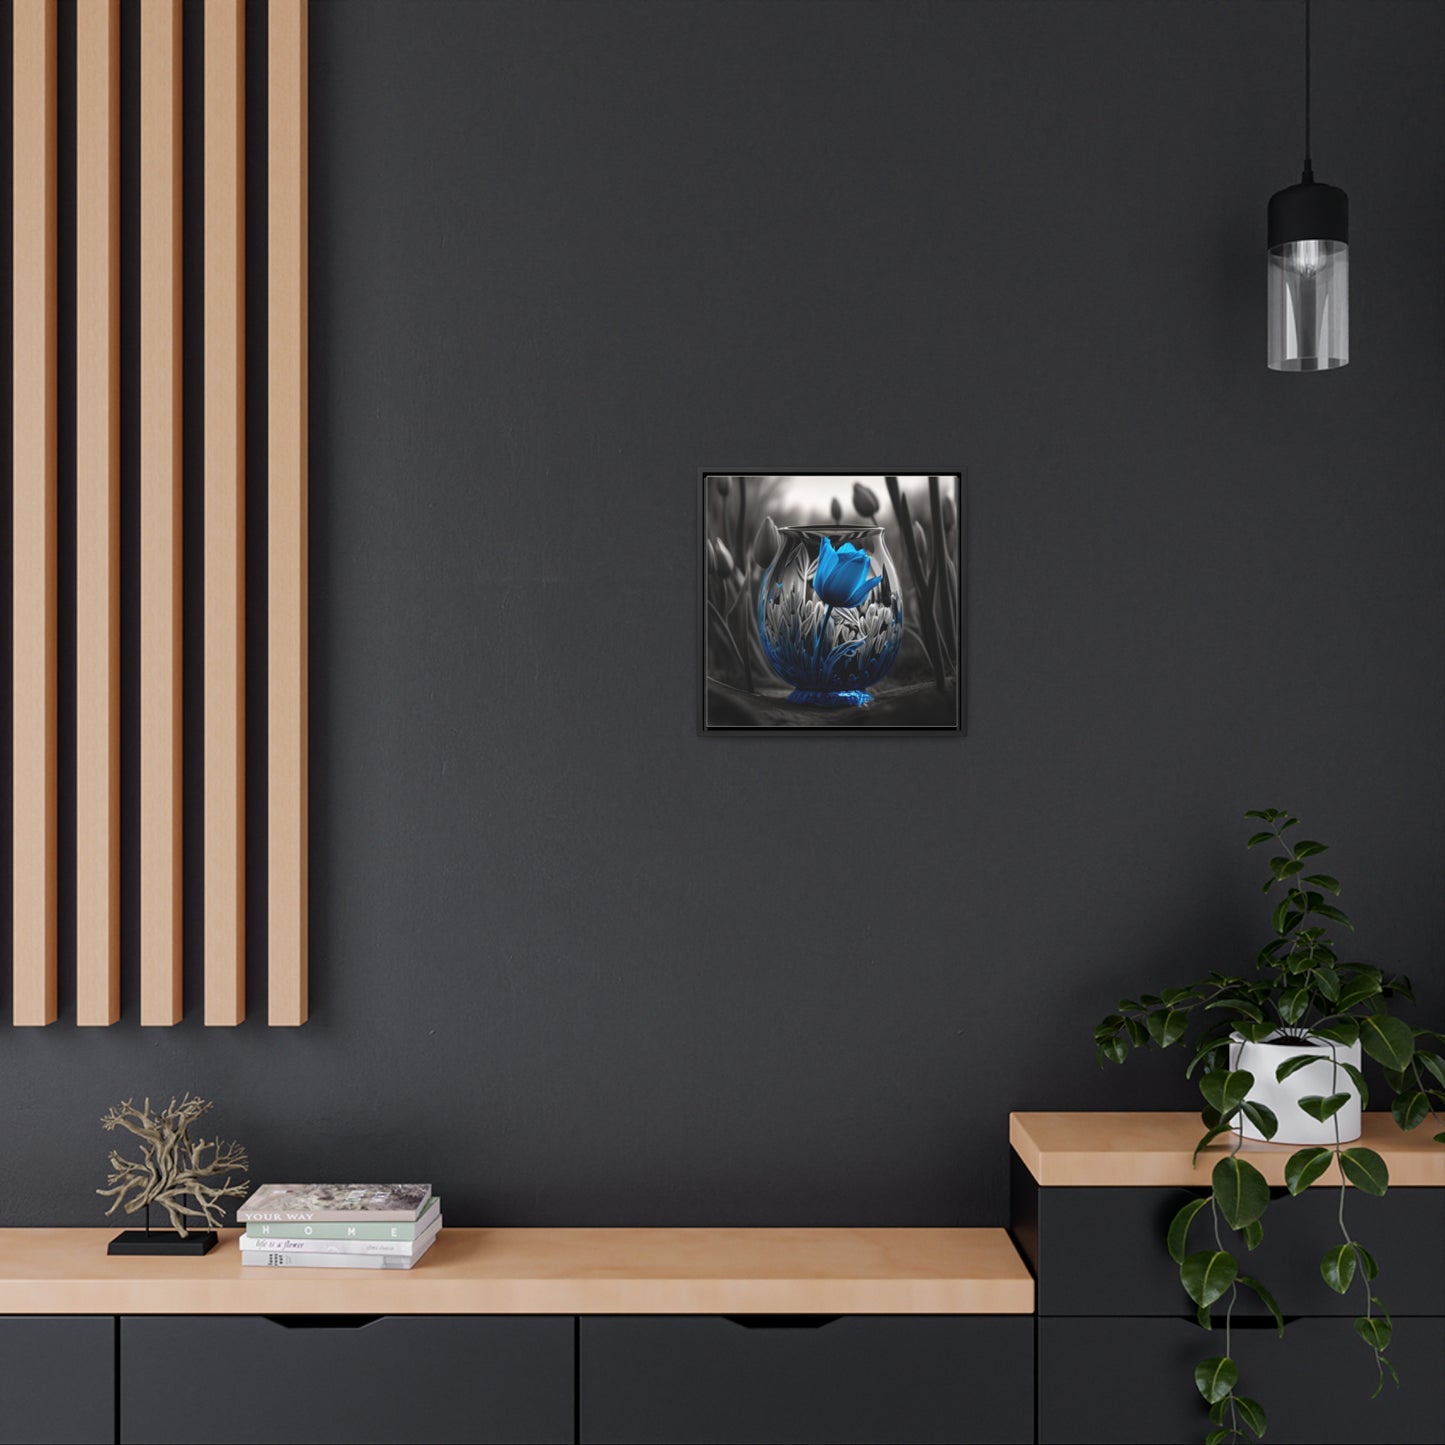 Gallery Canvas Wraps, Square Frame Tulip Blue 1